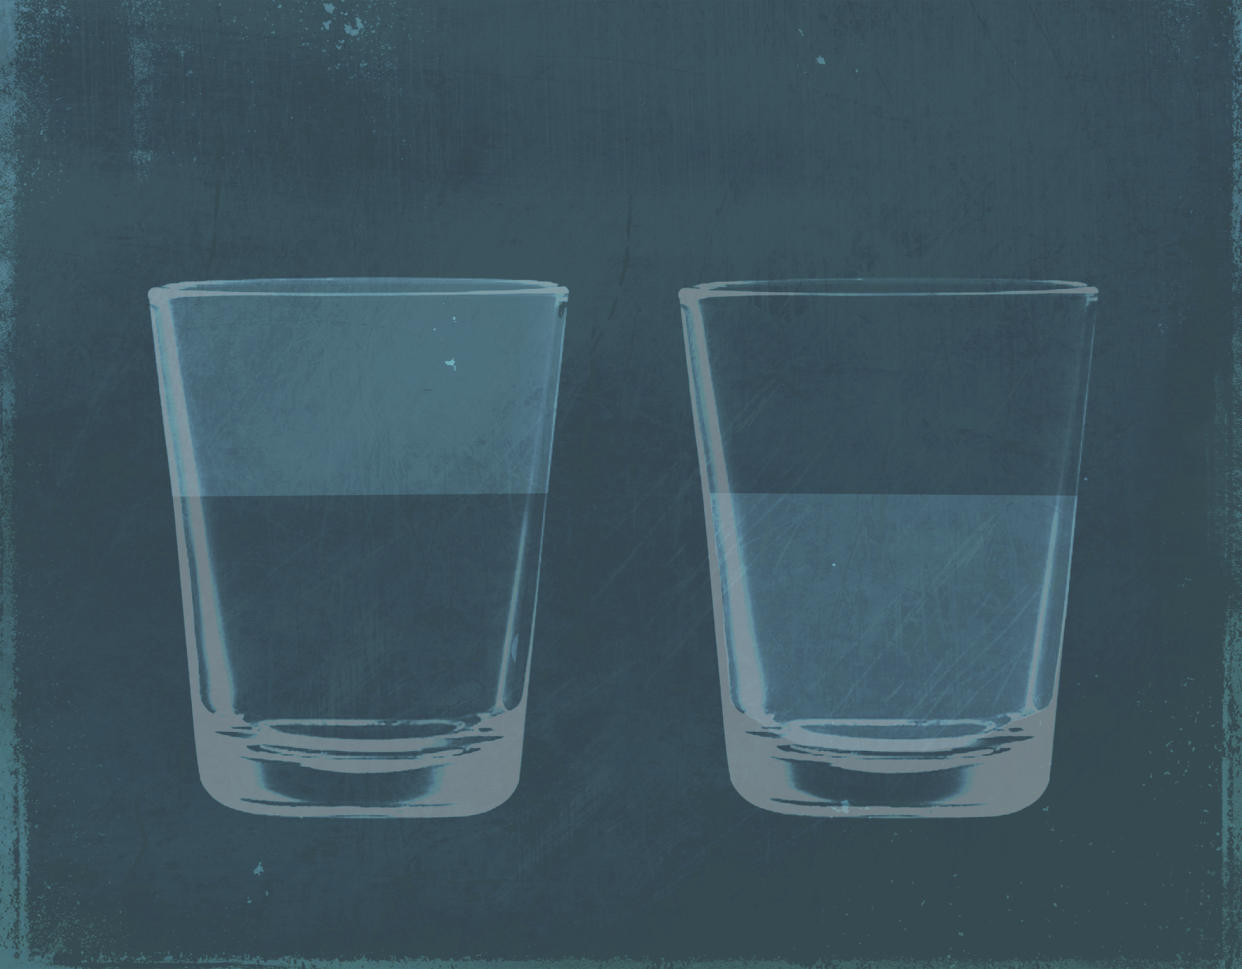  A half full glass of water next to a half empty glass of water. 